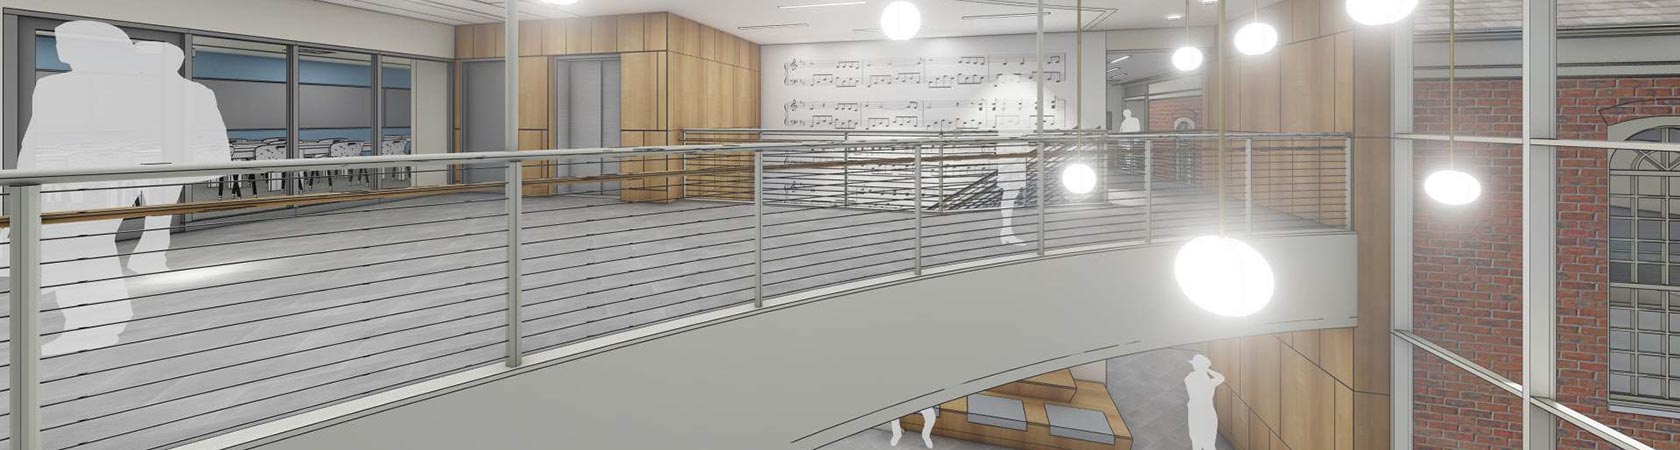 Building on Tradition: New Music Facility